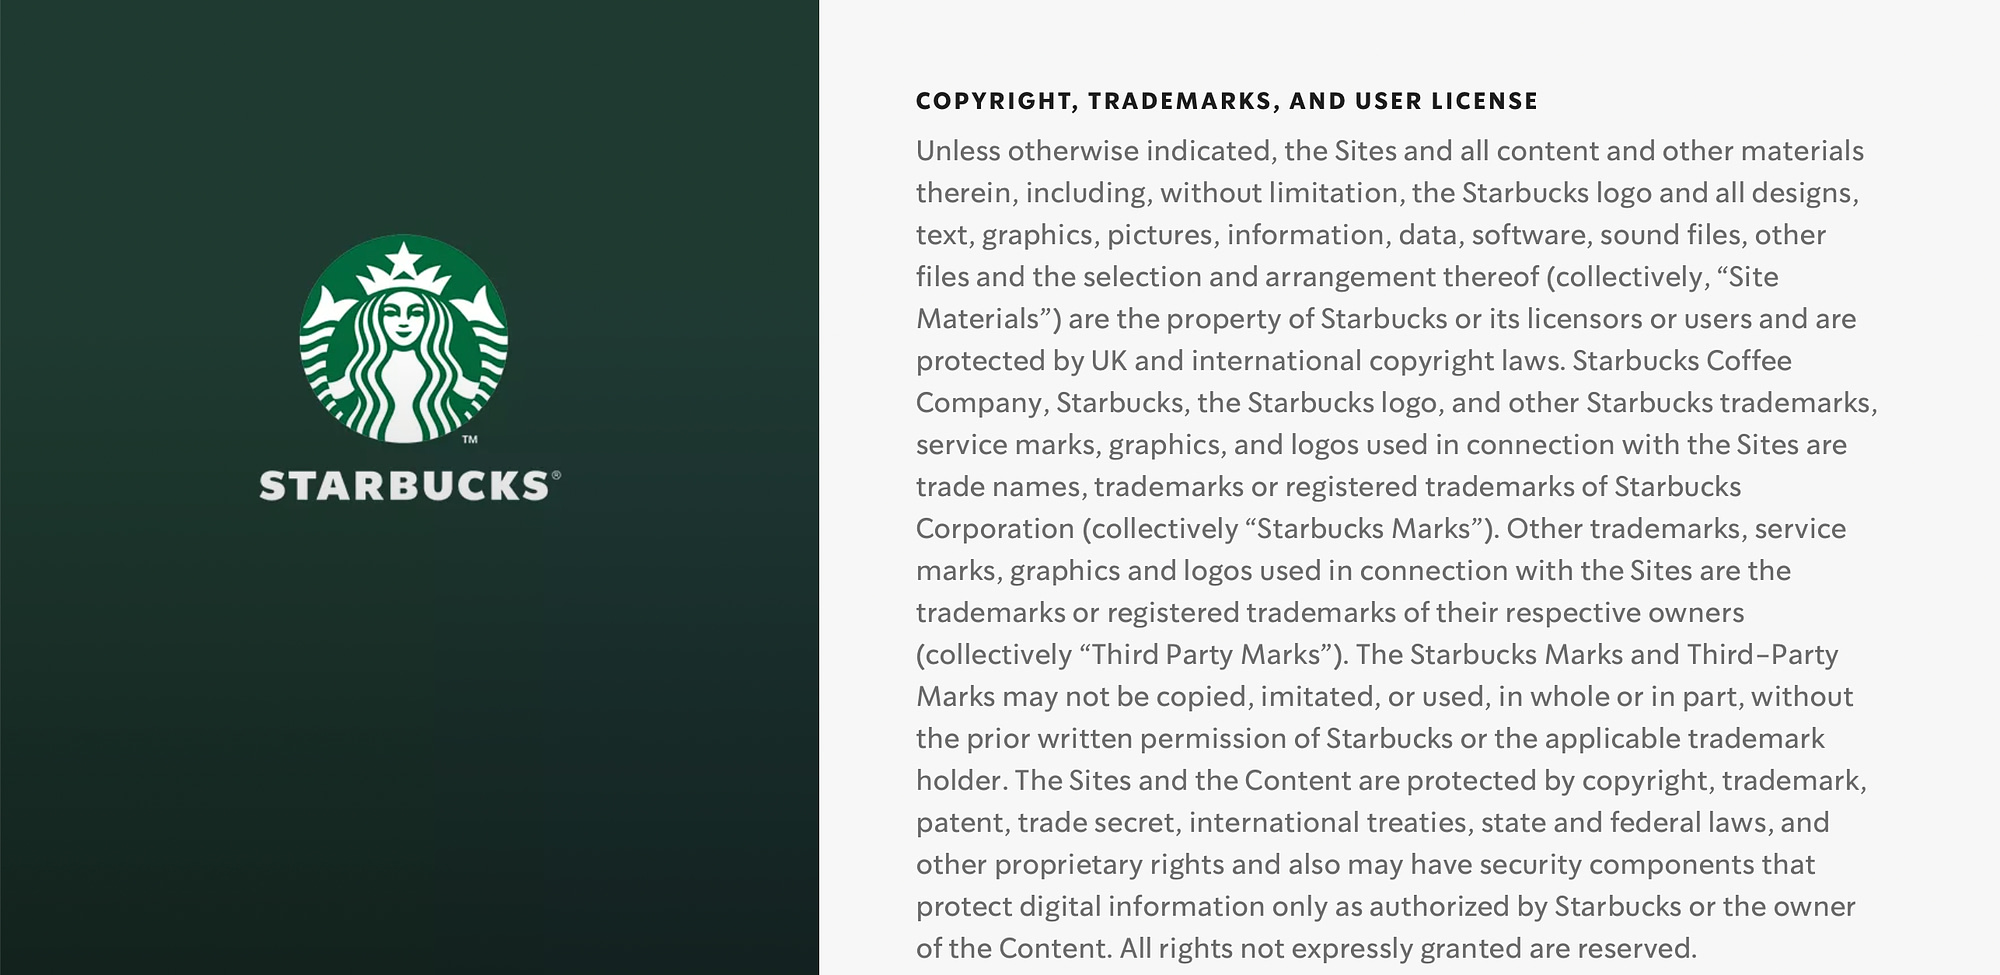 The Starbucks website uses a copyright notice to help prevent content scraping.